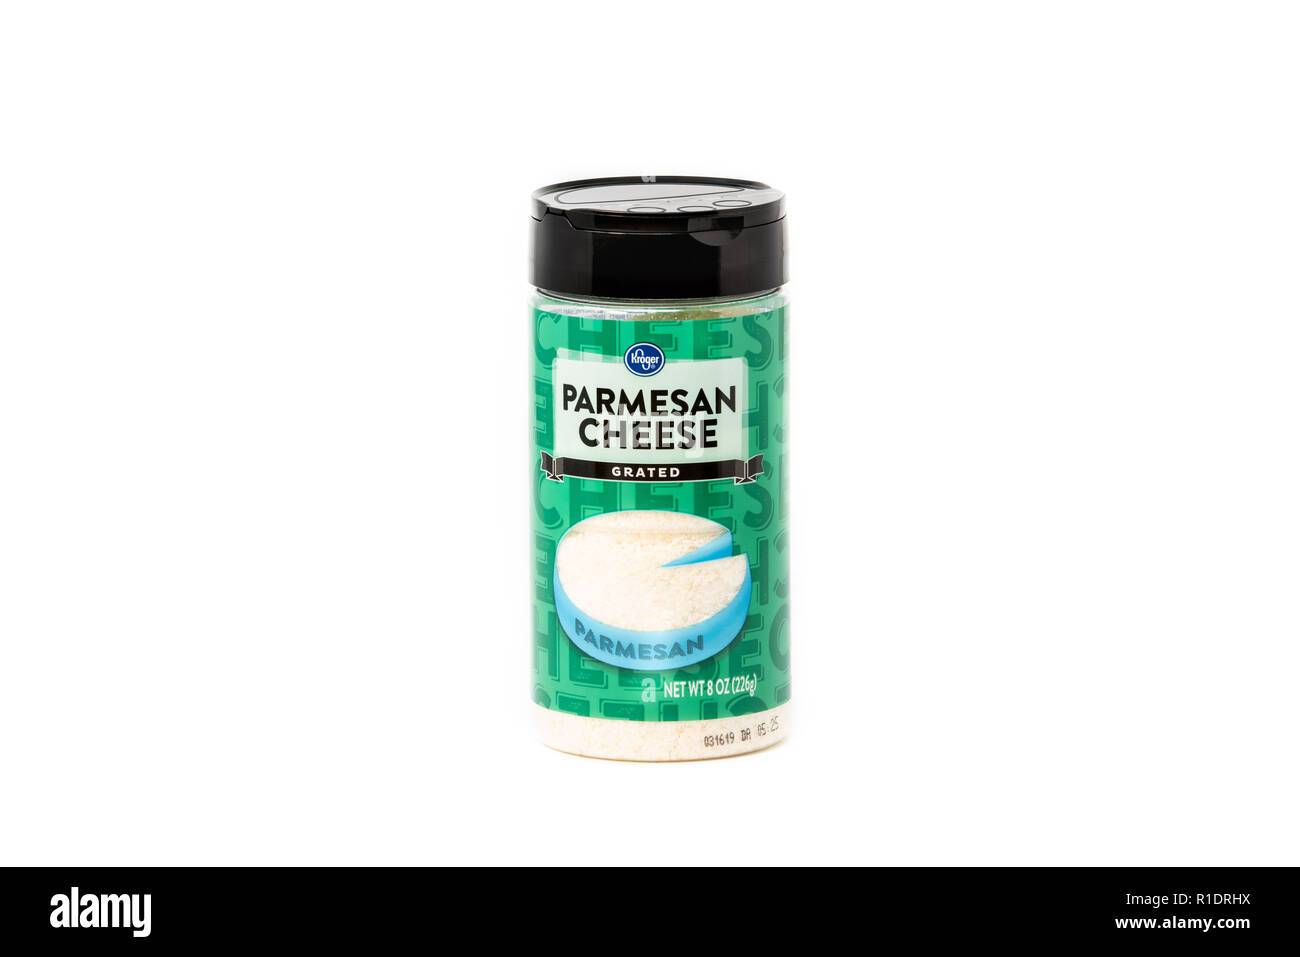 https://c8.alamy.com/comp/R1DRHX/portland-or-usa-november-10-2018-kroger-brand-grated-parmesan-cheese-in-a-plastic-container-R1DRHX.jpg